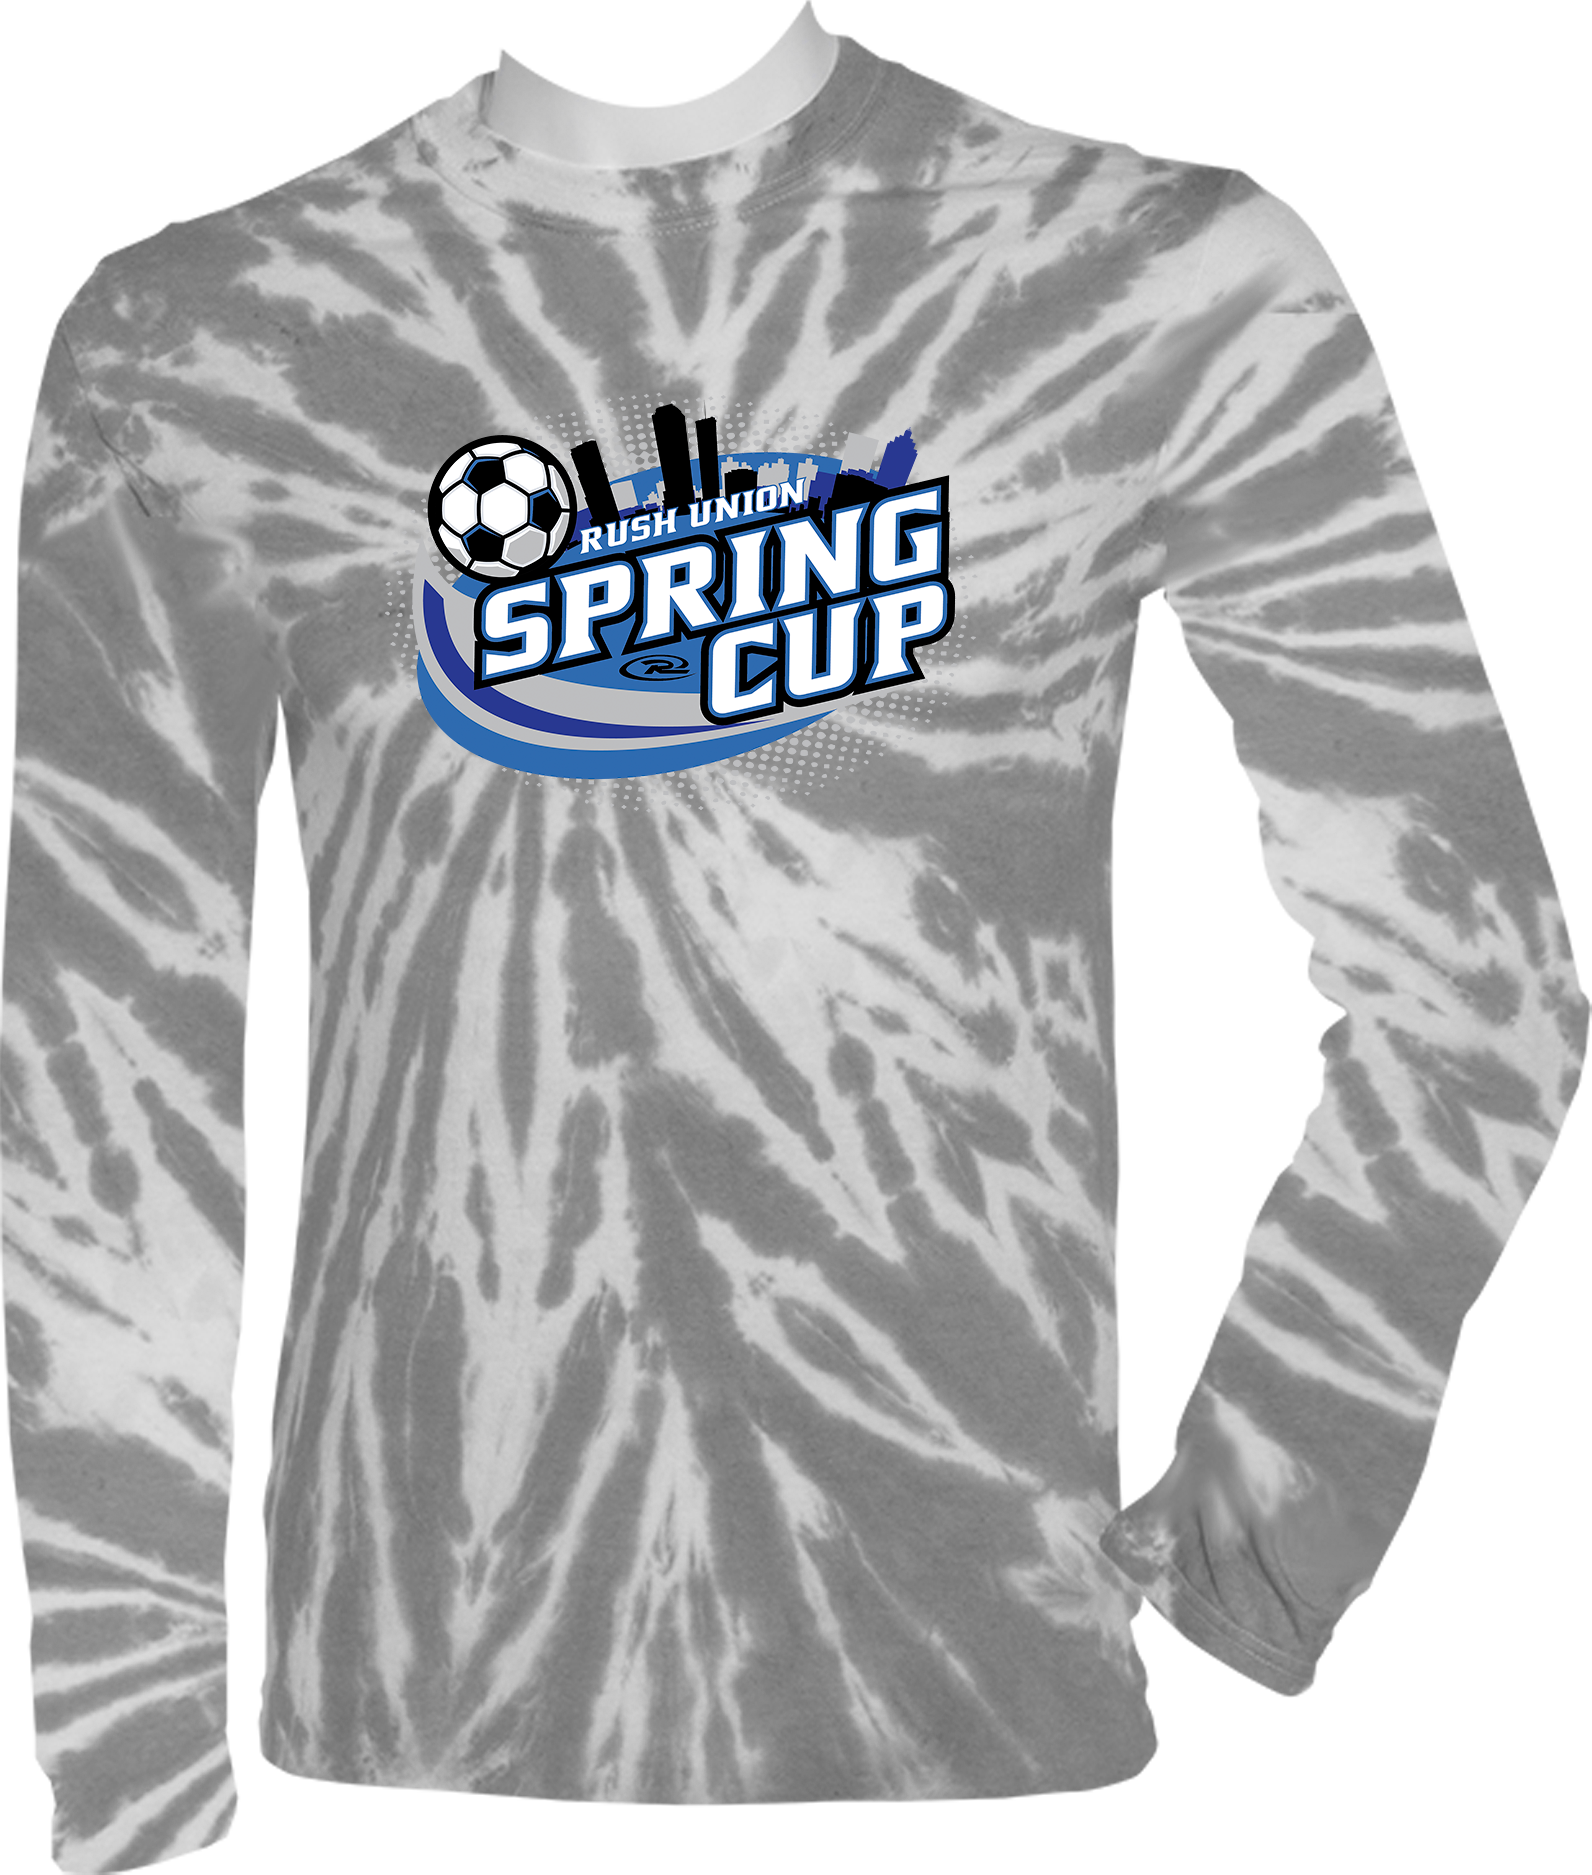 TIE-DYE LONG SLEEVES - 2023 Rush Union Spring Cup